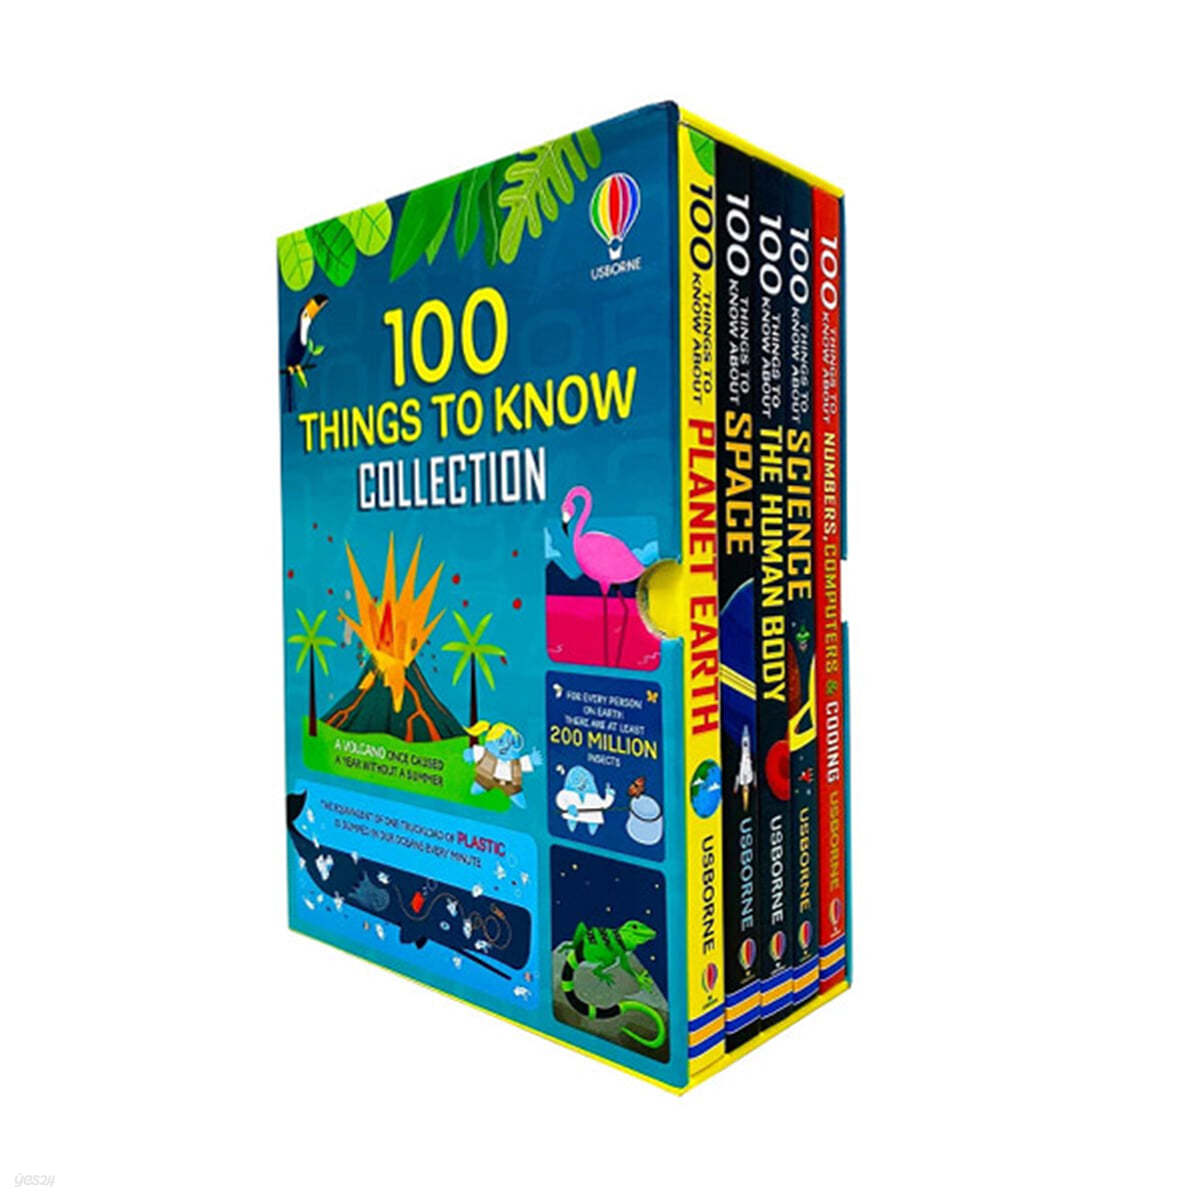 100 Things to Know About 5 Books Box Set